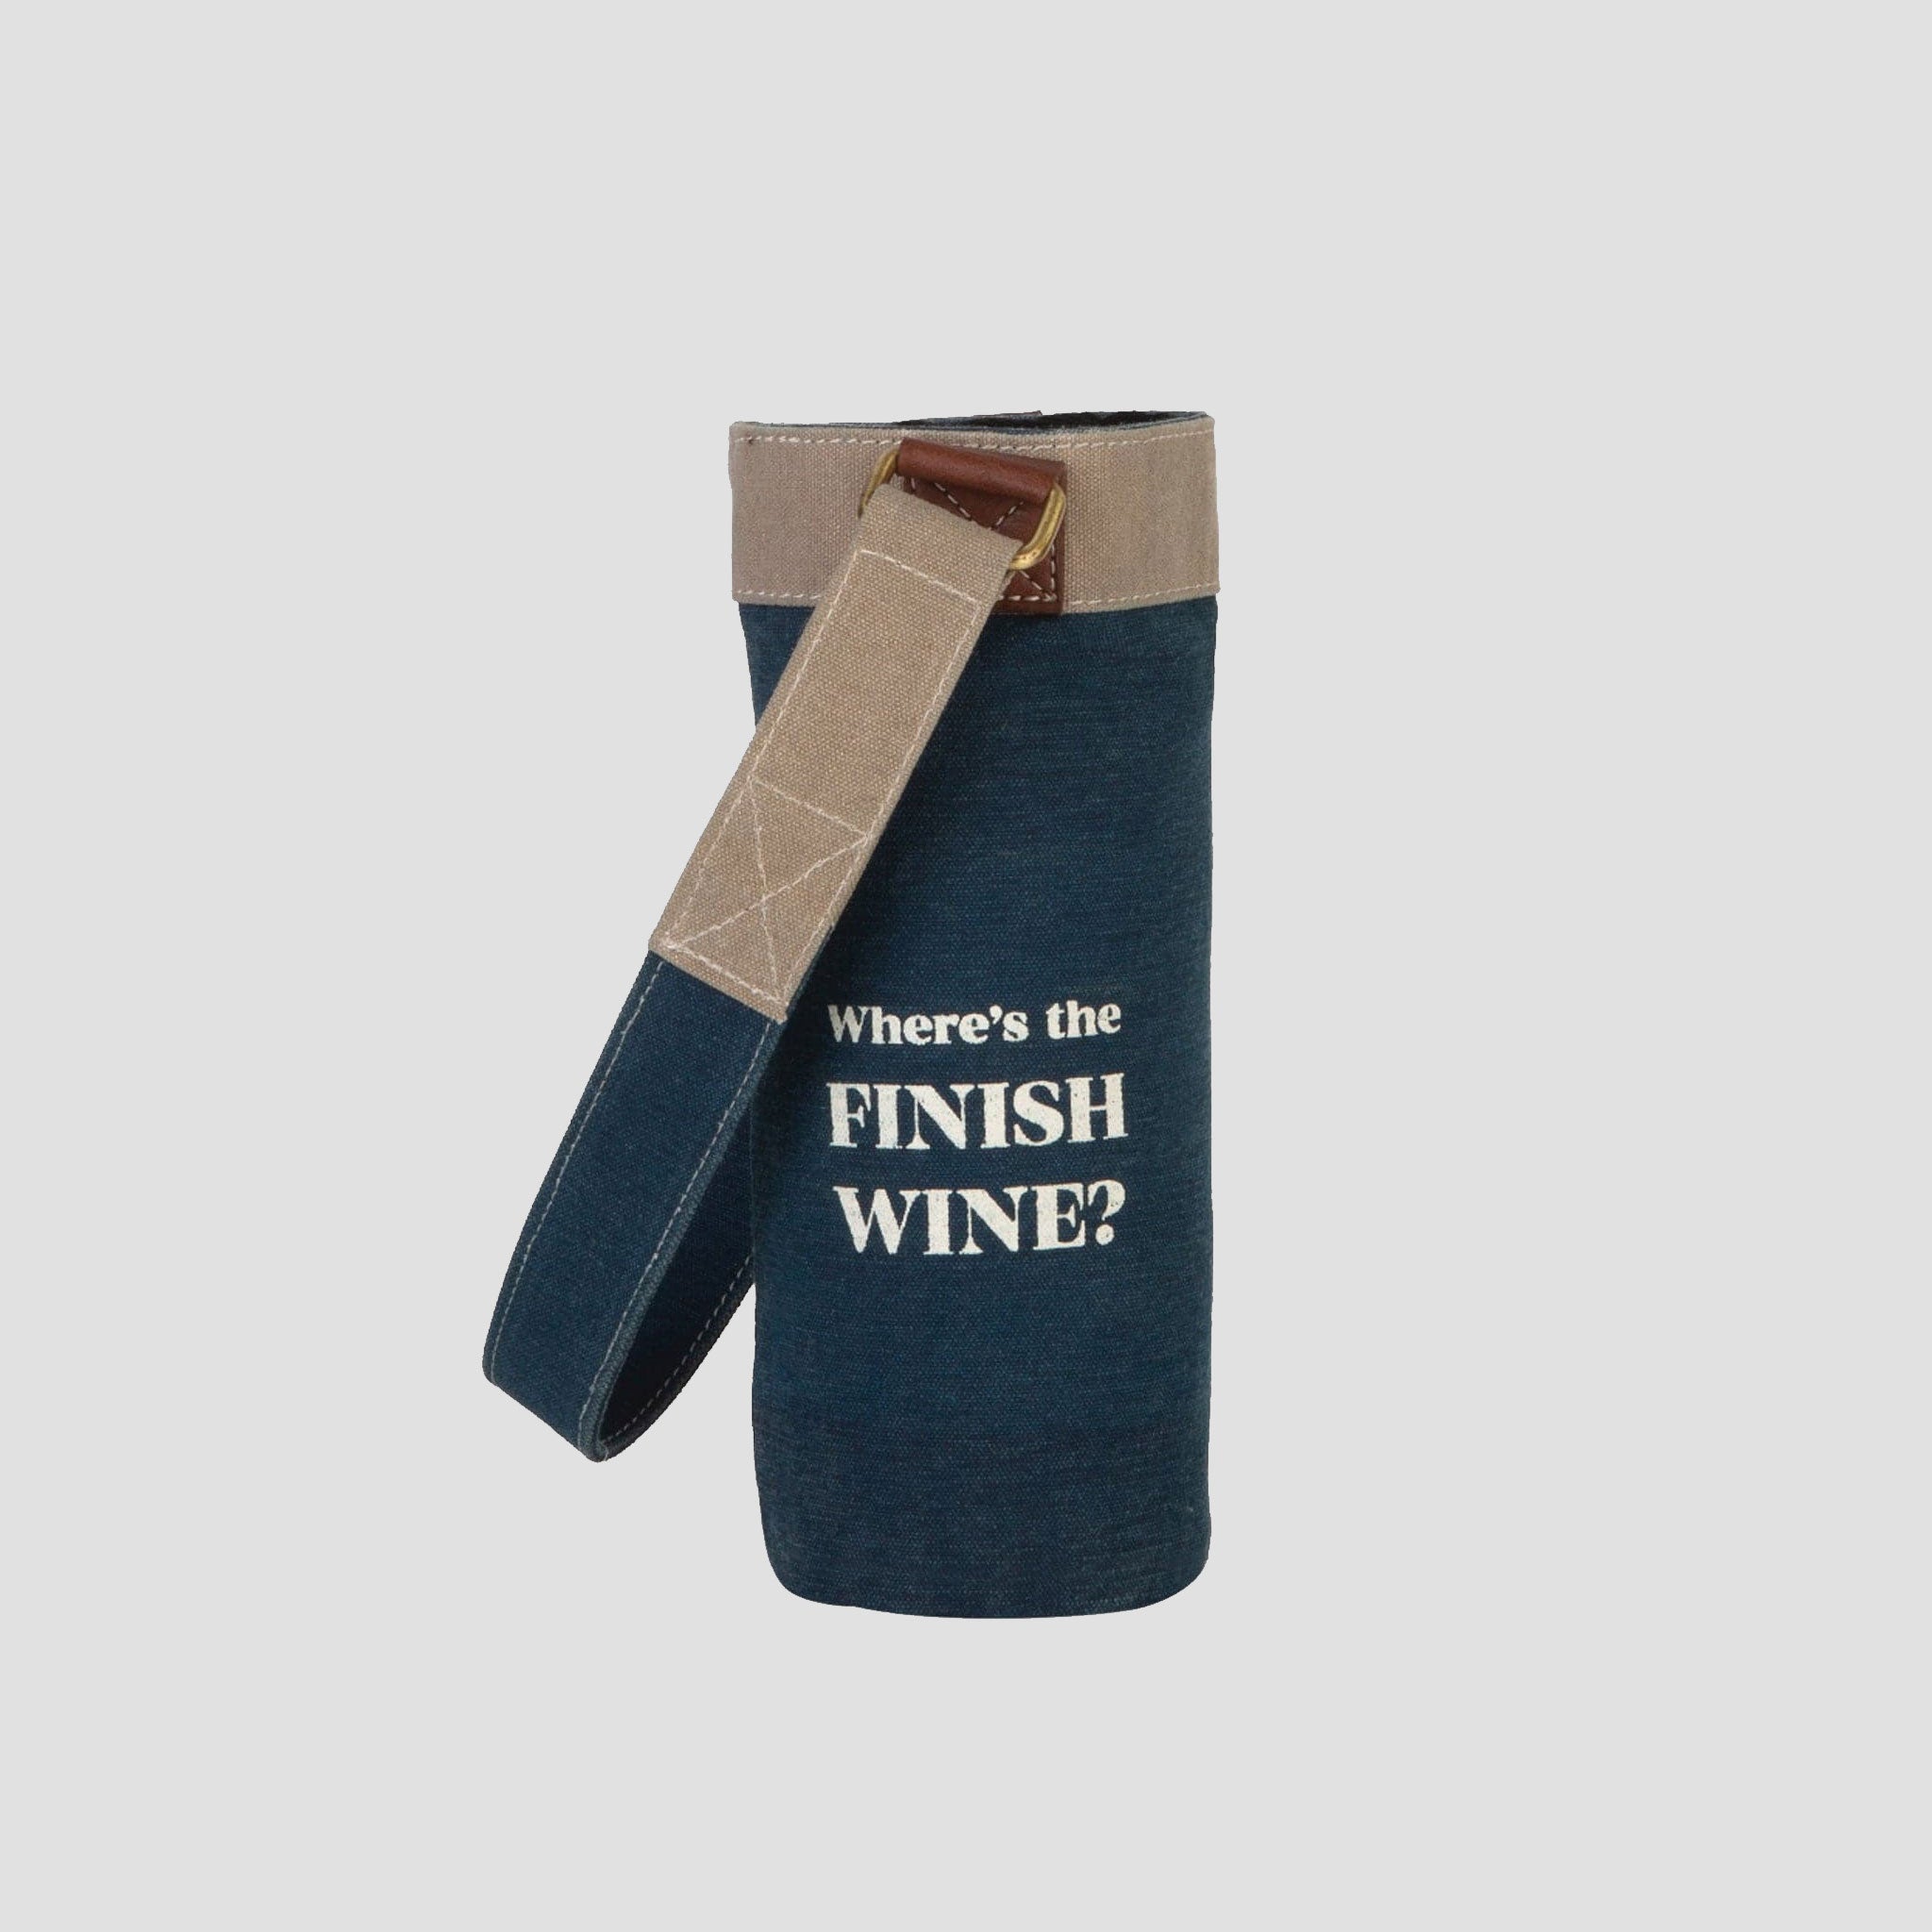 Mona B 100% Canvas Wine Bags Perfect to give as a Gift or for Yourself as You New go-to Wine Bag (Finish Wine) - Drinkware by Mona-B - Backpack, EOSS, Flat70, Sale, 